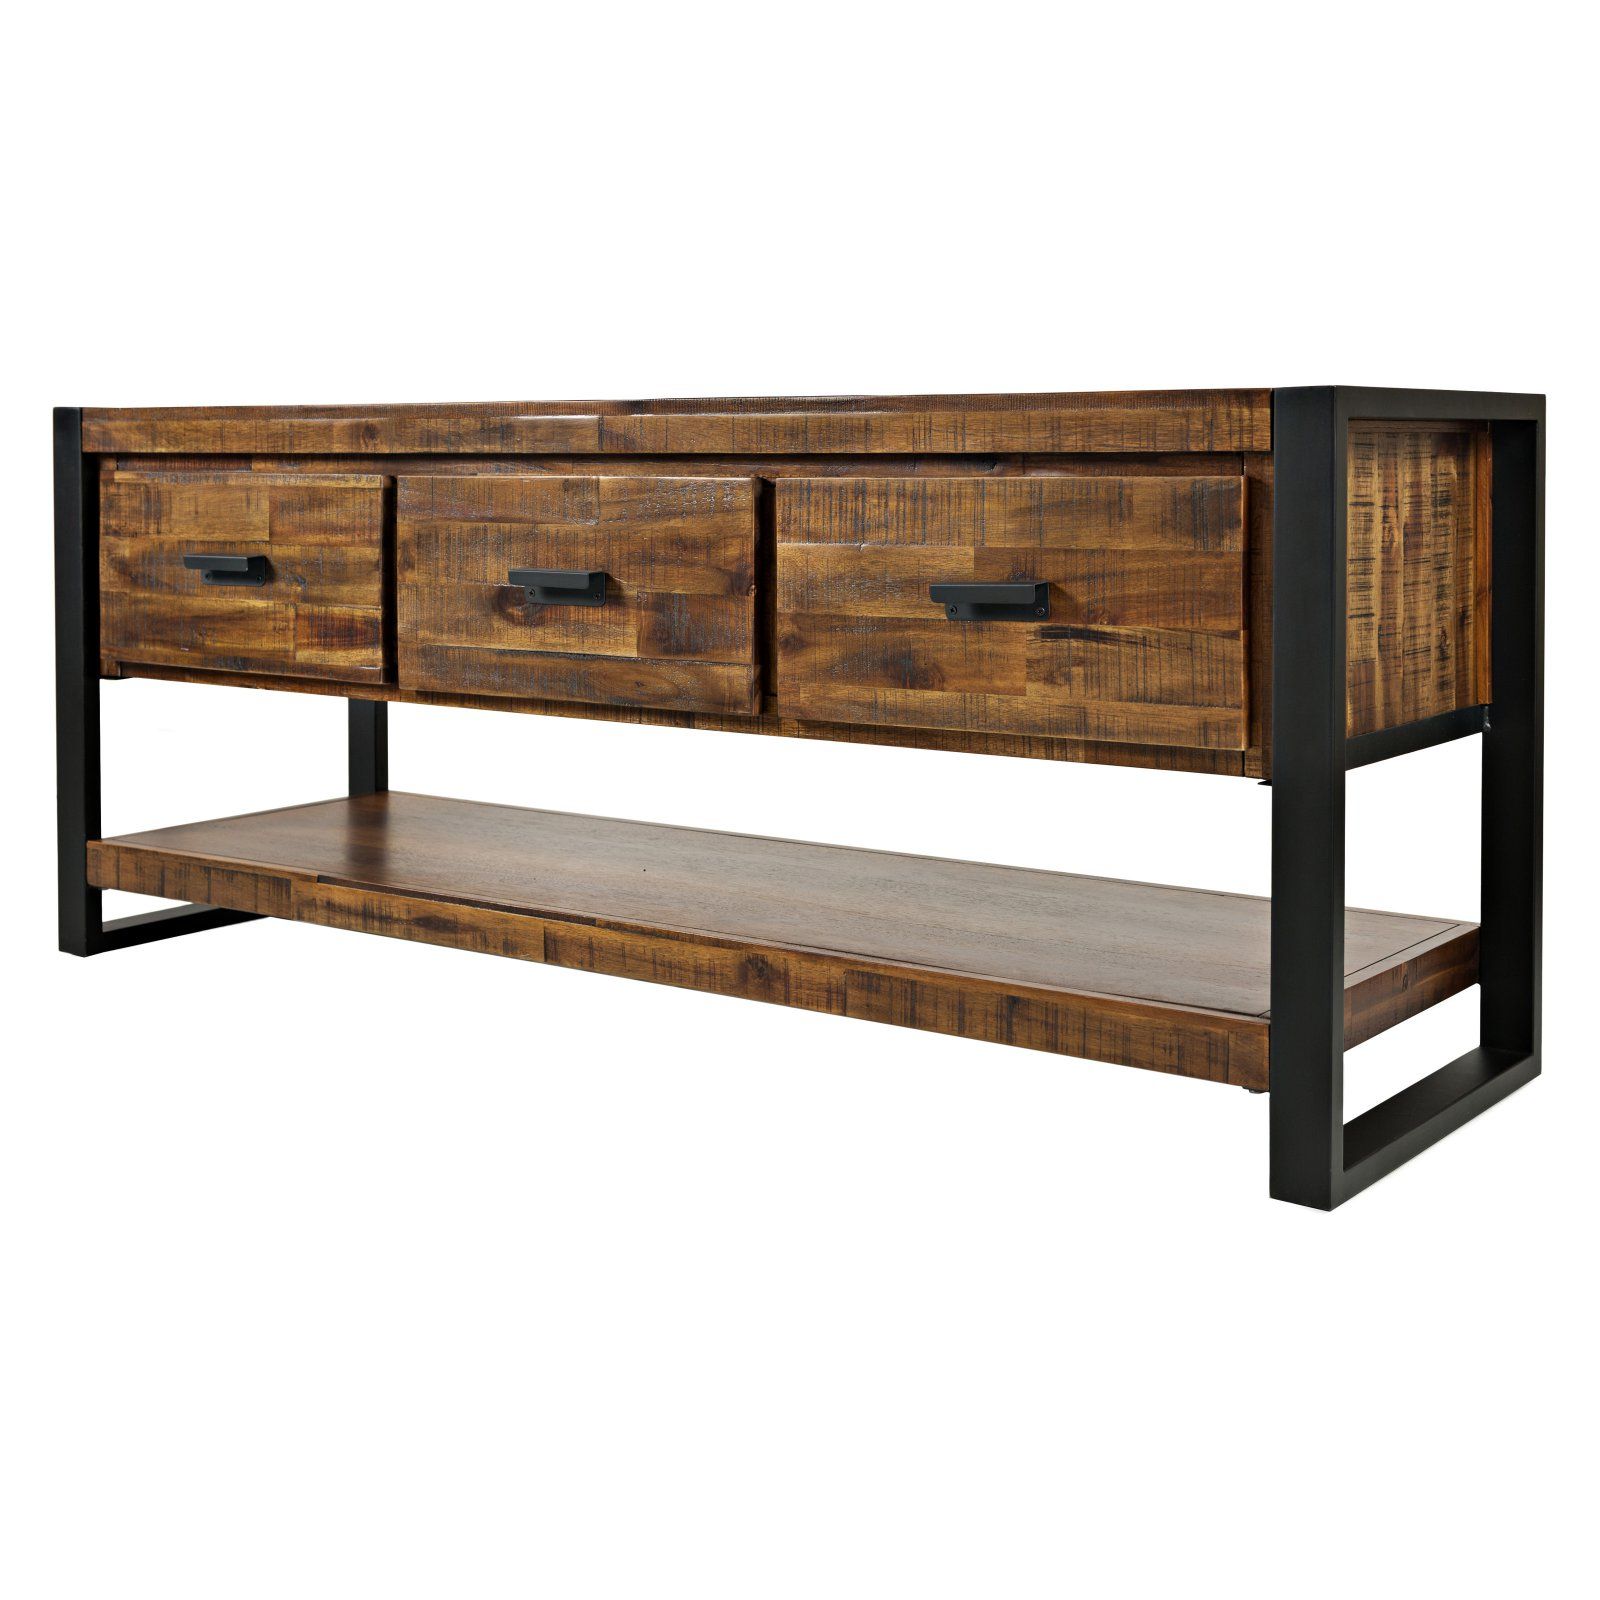 2017 Jofran Loftworks Media Console – Walmart With Regard To Loftworks Tv Stands (View 5 of 10)